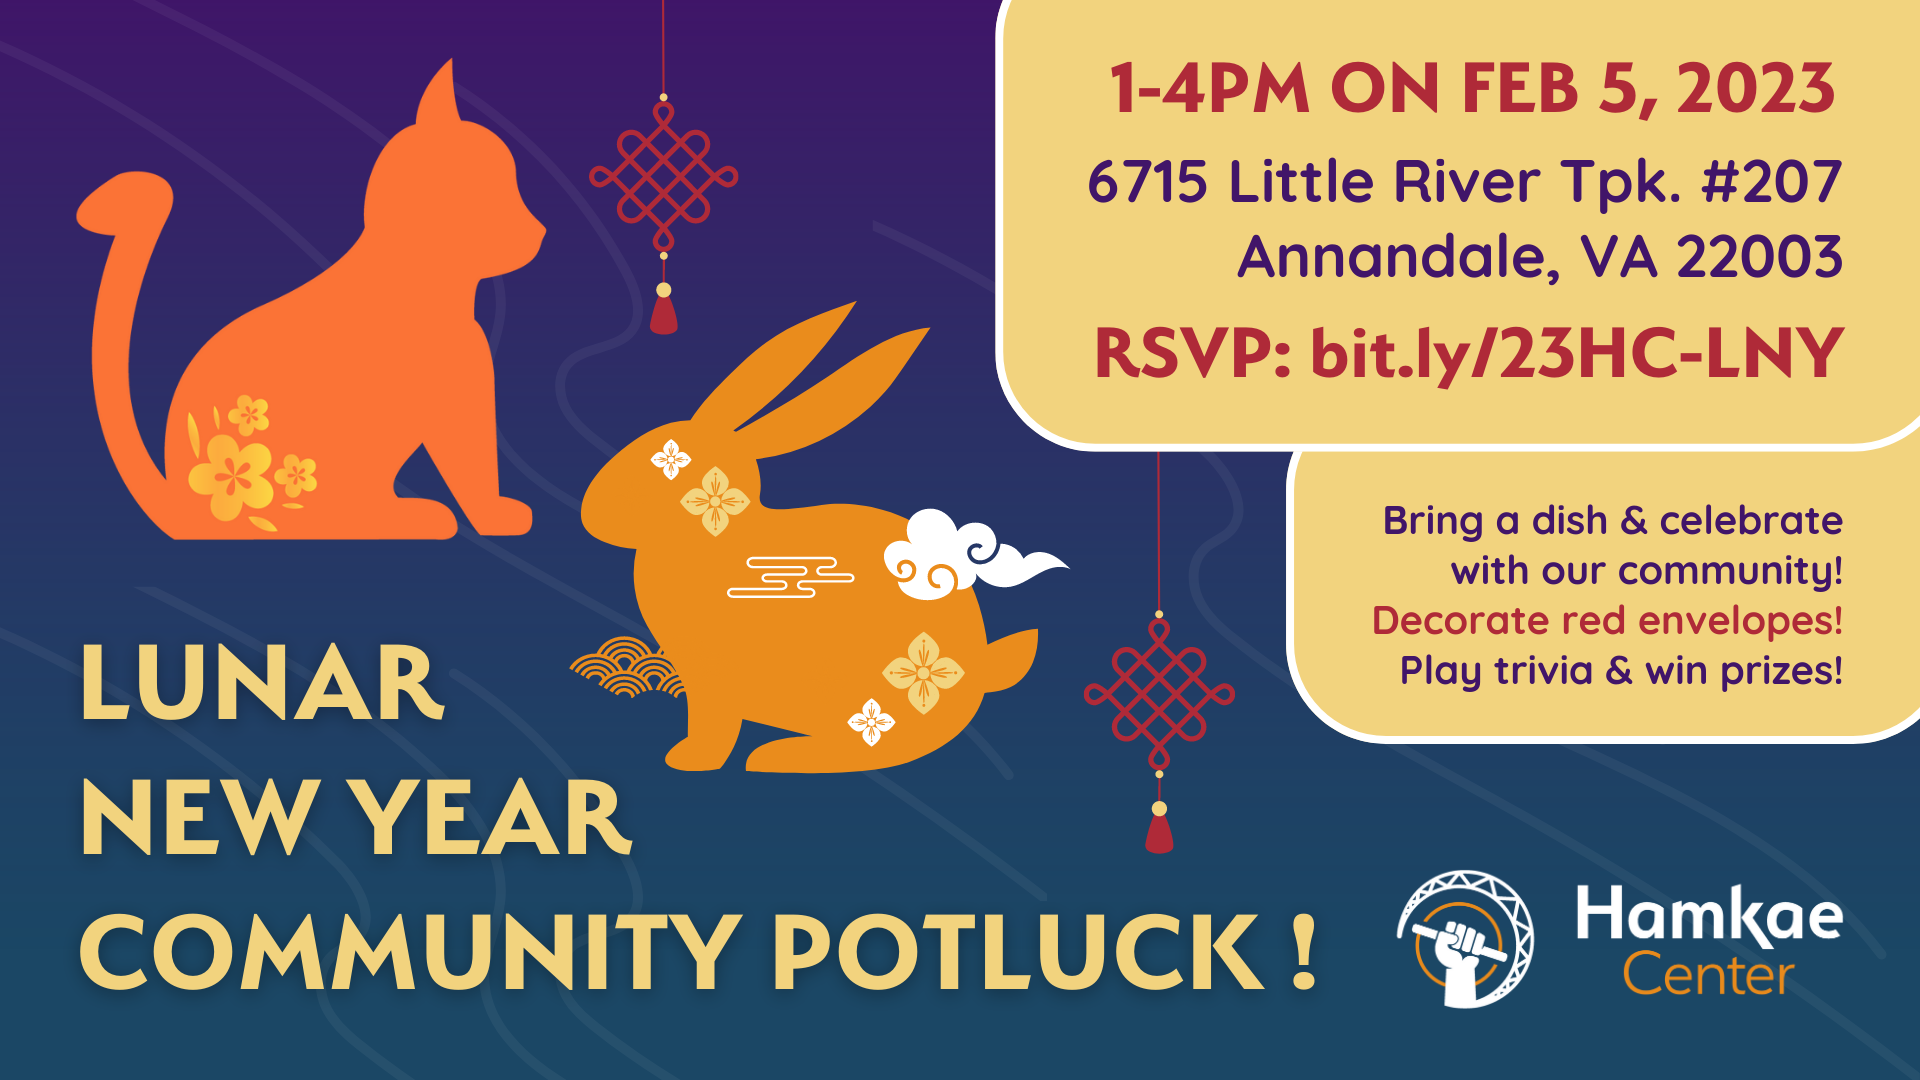 Lunar New Year Community Potluck! 1-4PM on Feb 5, 2023 6715 Little River Tpk. #207 Annandale, VA 22003 RSVP: bit.ly/23HC-LNY Bring a dish & celebrate with our community! Decorate red envelopes! Play trivia & win prizes!